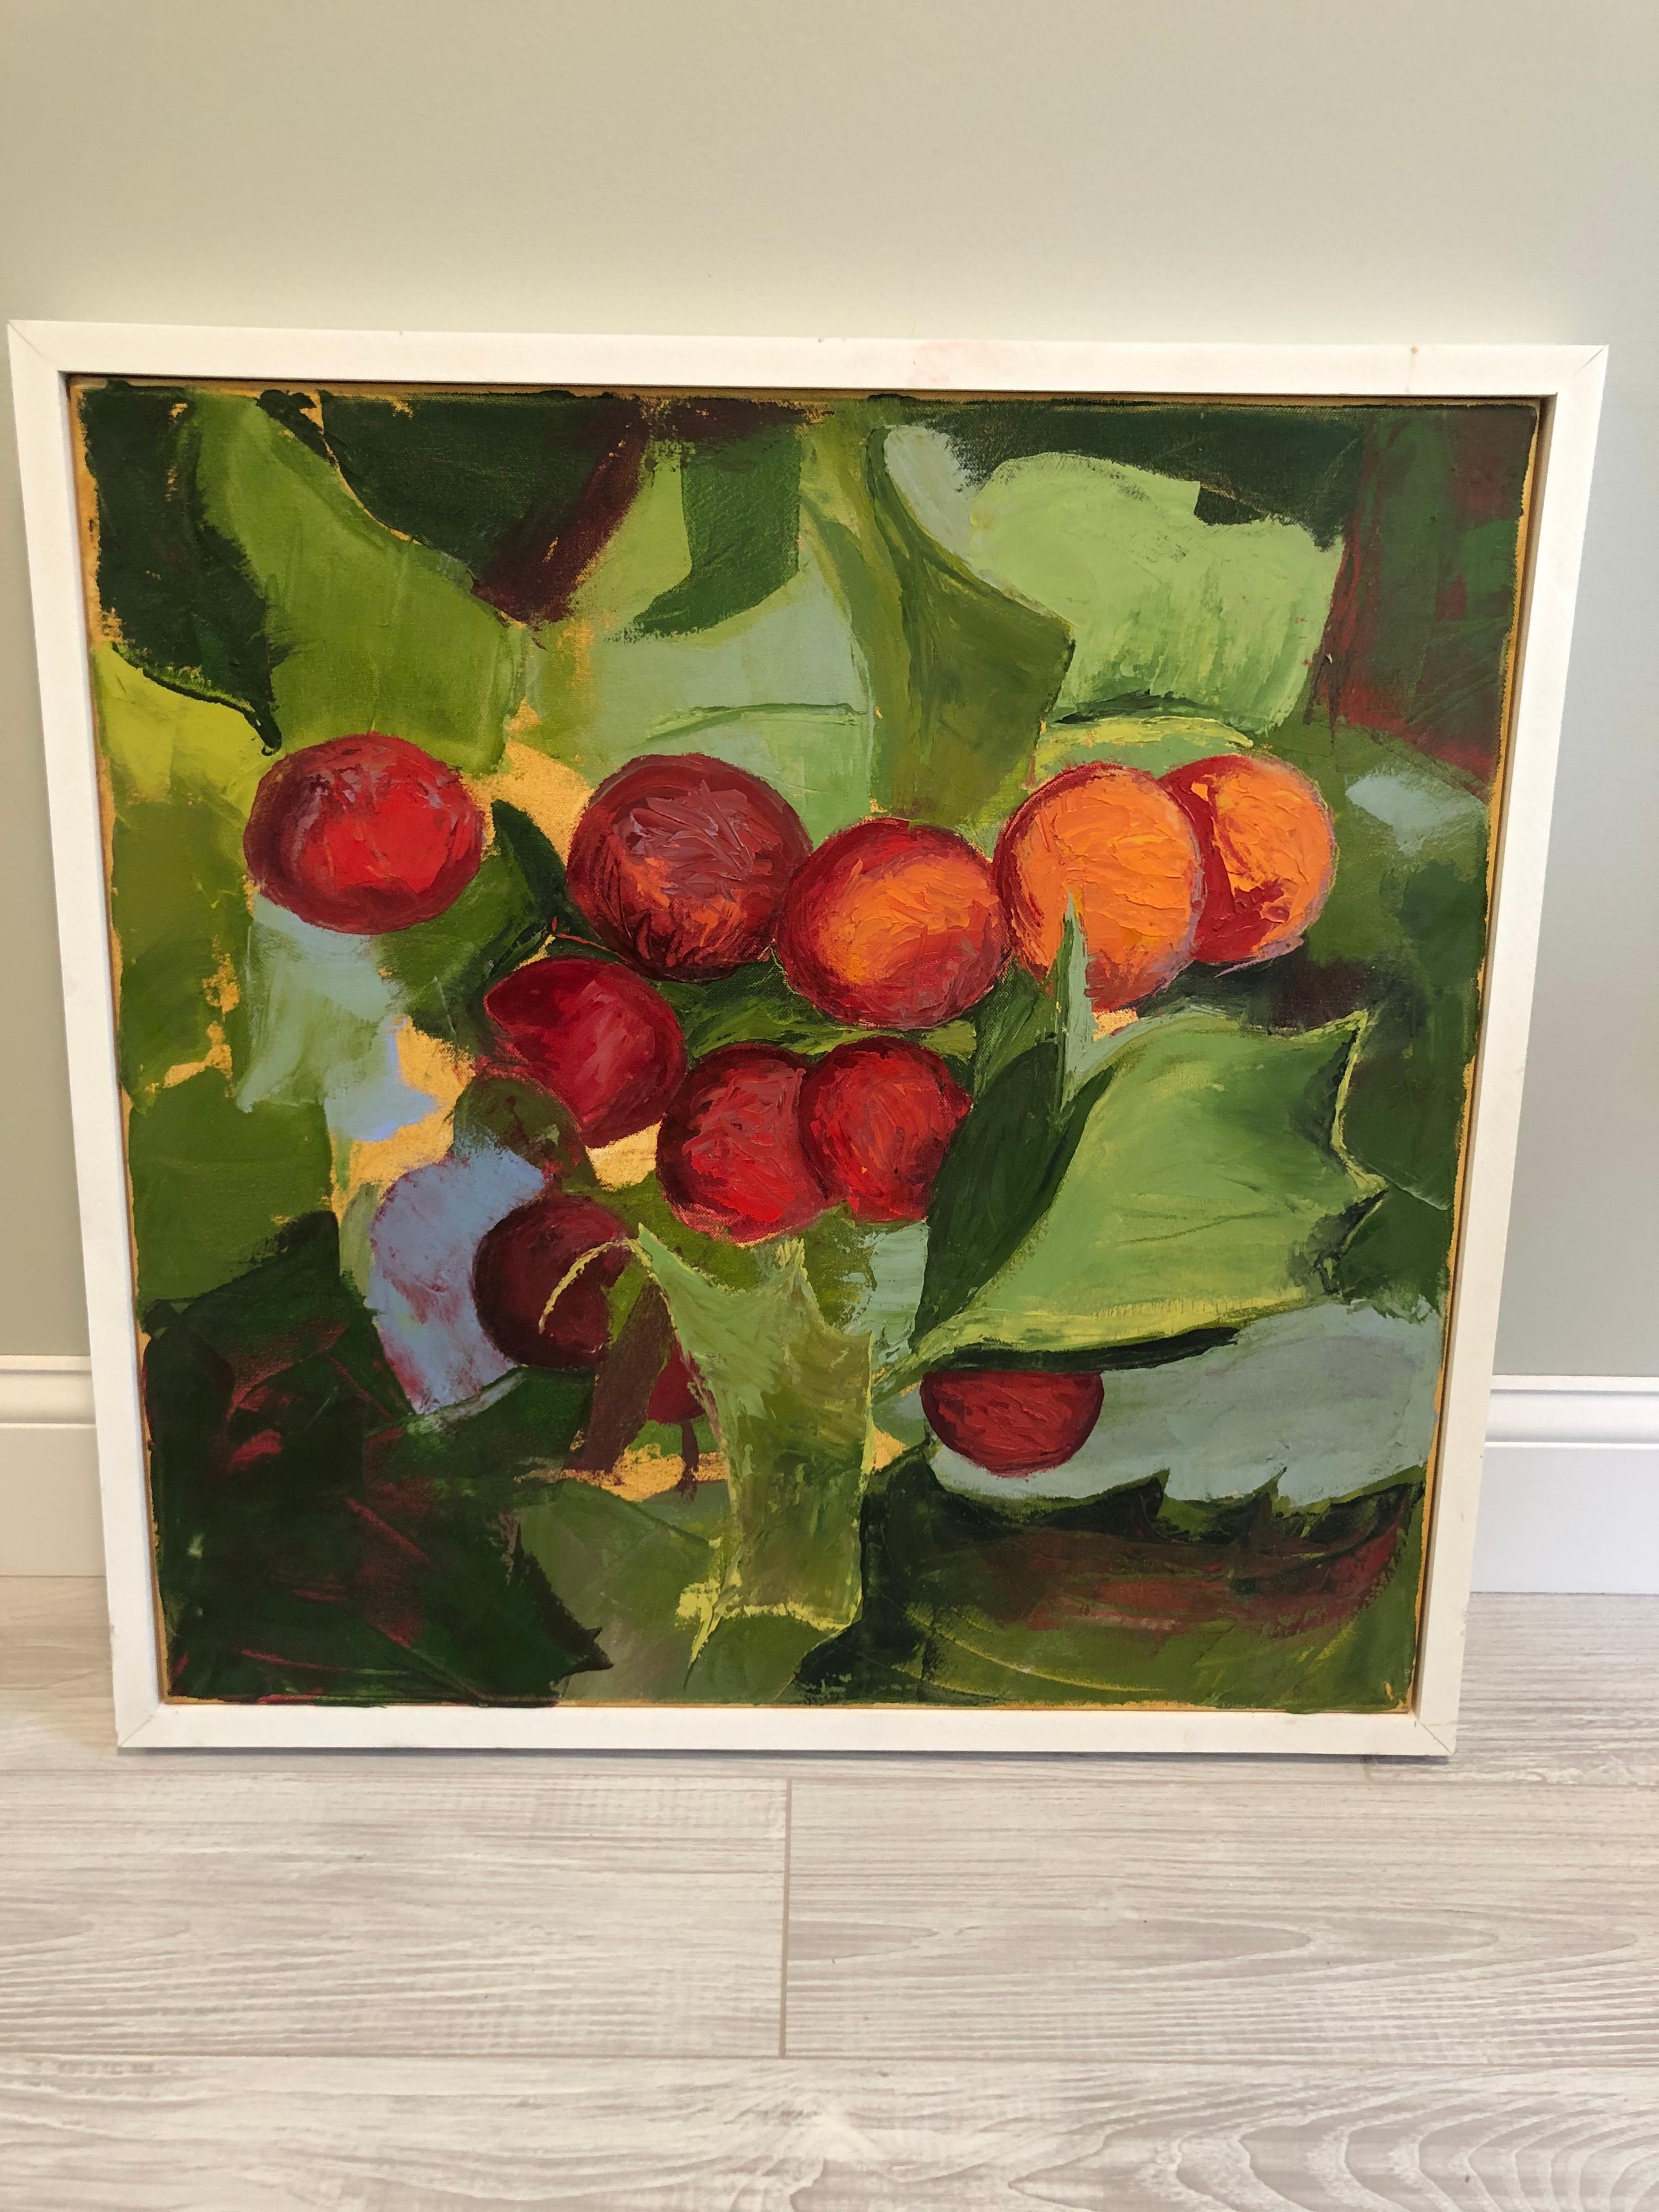 Colorful still life on canvas of Berries by Beverly Ward. Nice contemporary composition. This will pop off of any wall. Colorful and playful. Signed on rear. This item can parcel ship domestically for $49.